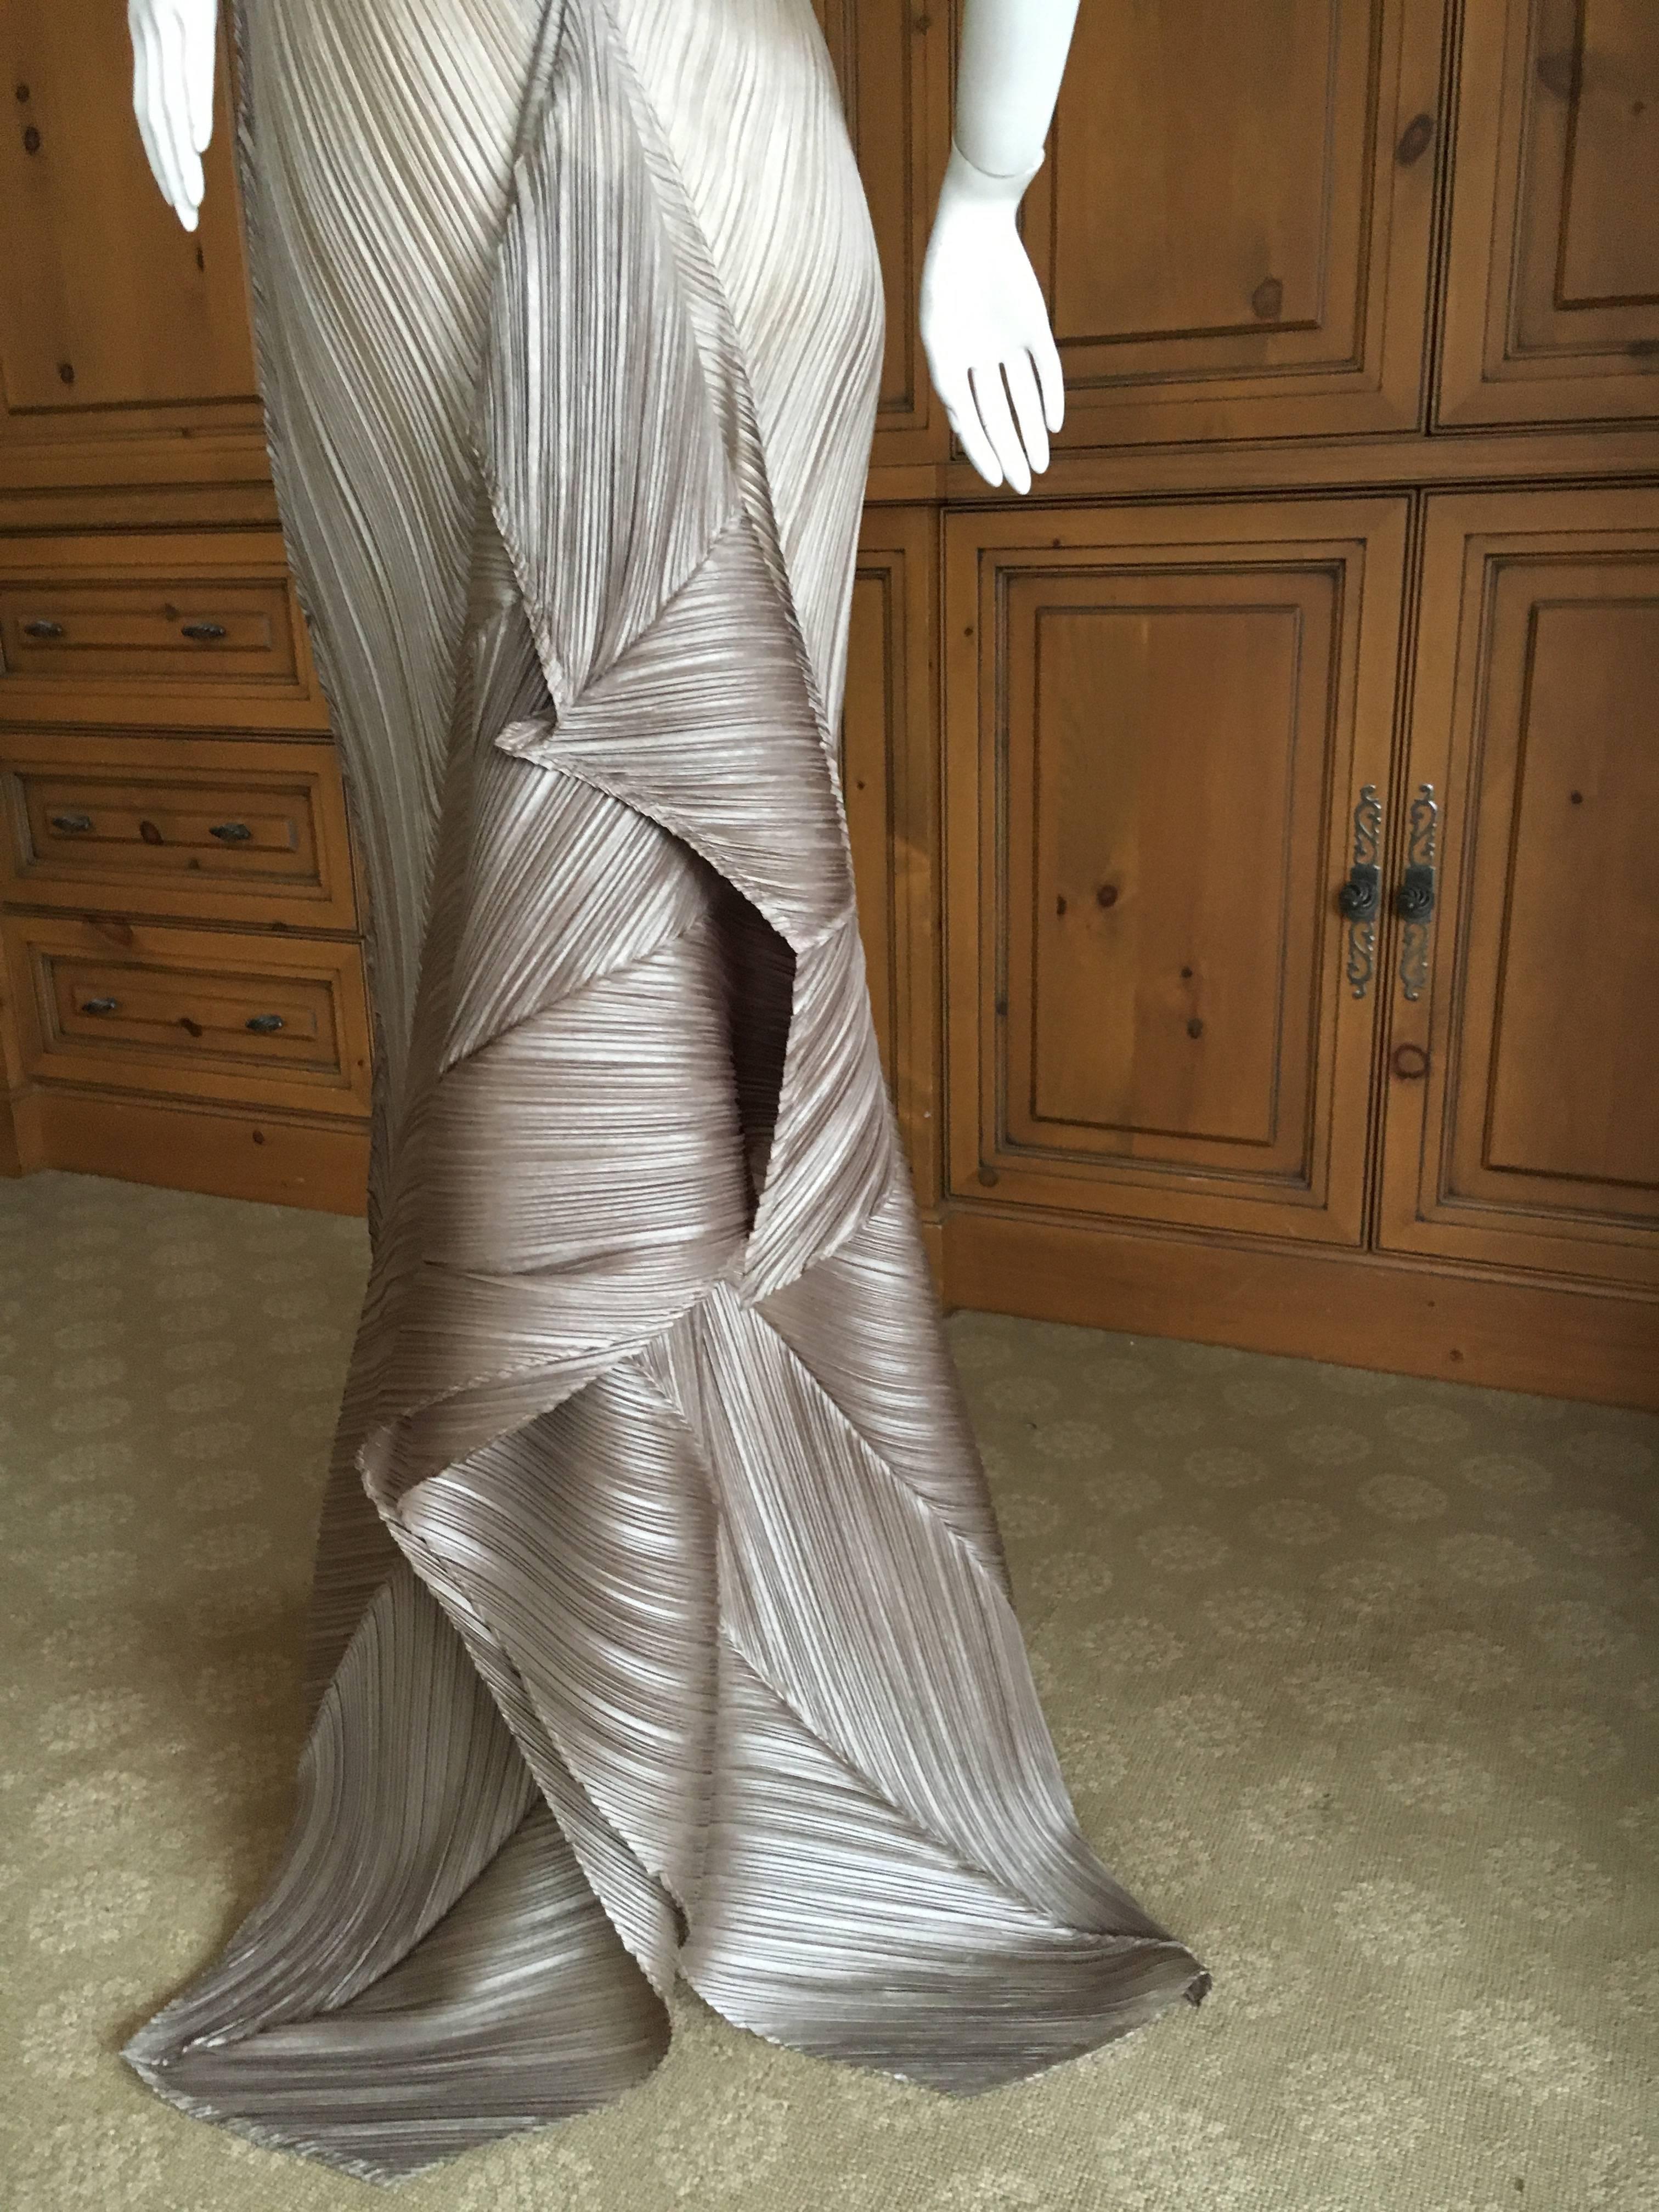 Women's Issey Miyake Vintage Silver Evening Dress with Unusual Bustle Train For Sale